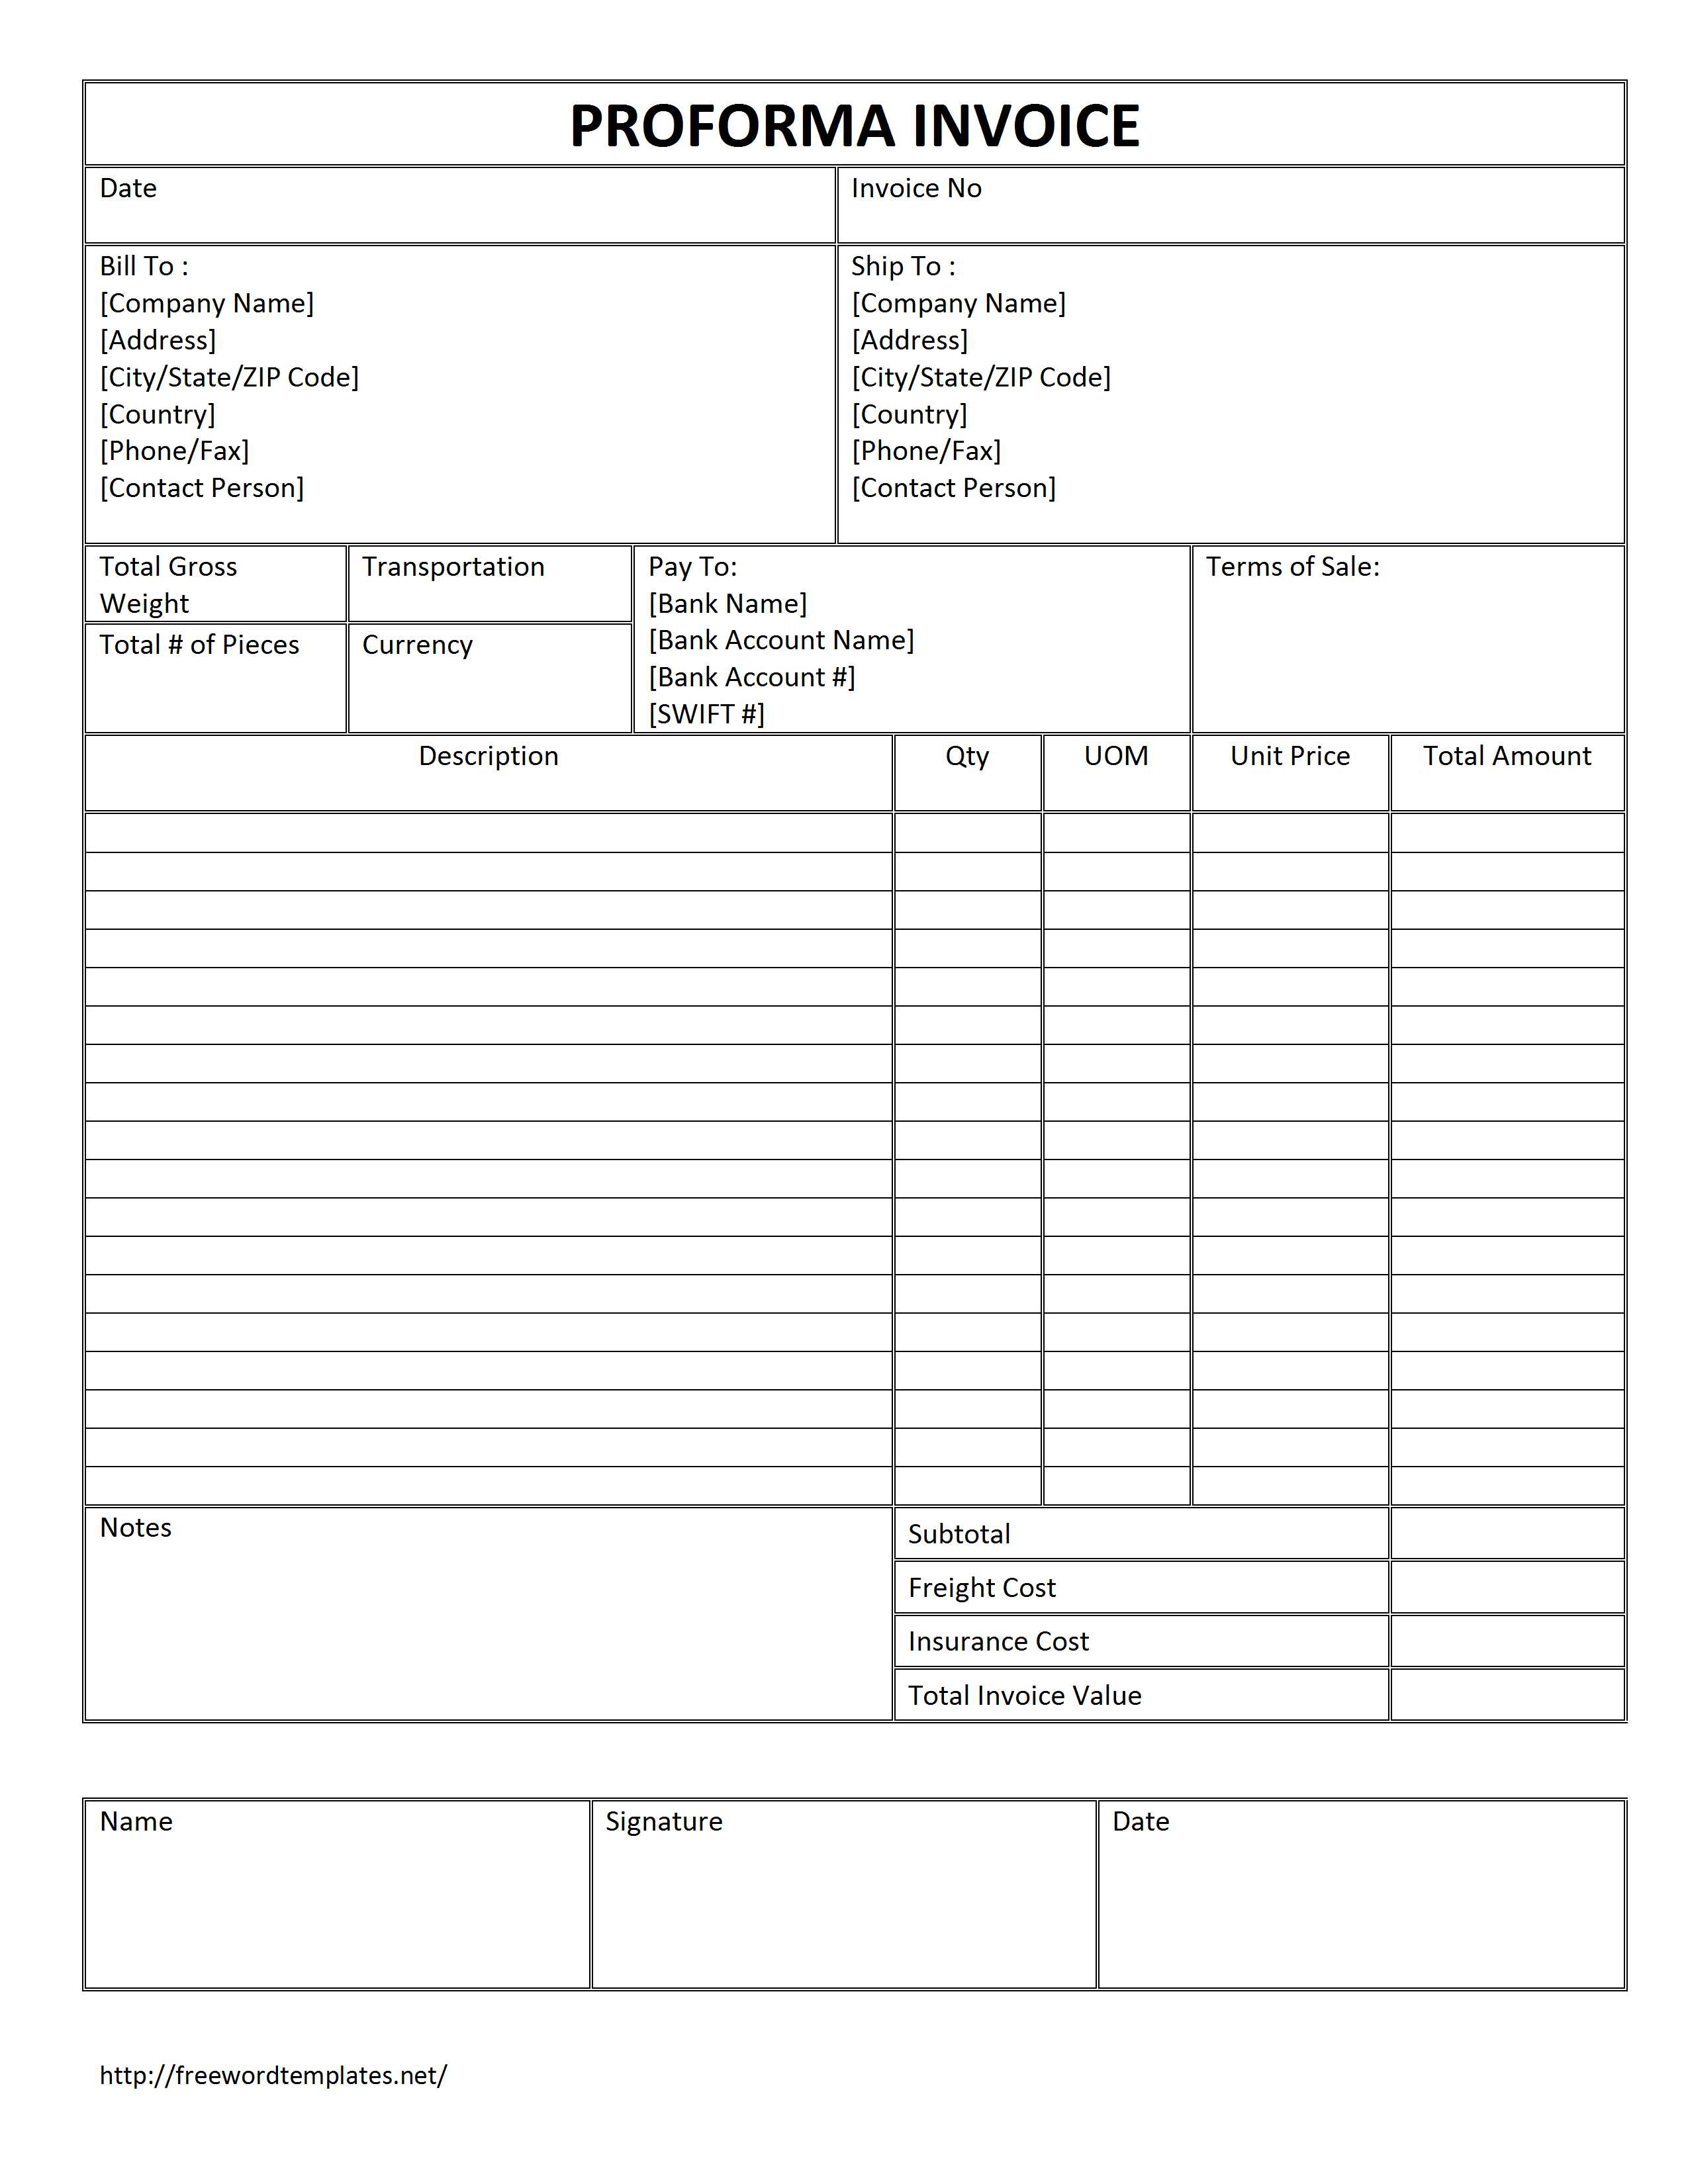 proforma invoice and invoice proforma invoice word templates free word templates ms word 2550 X 3300